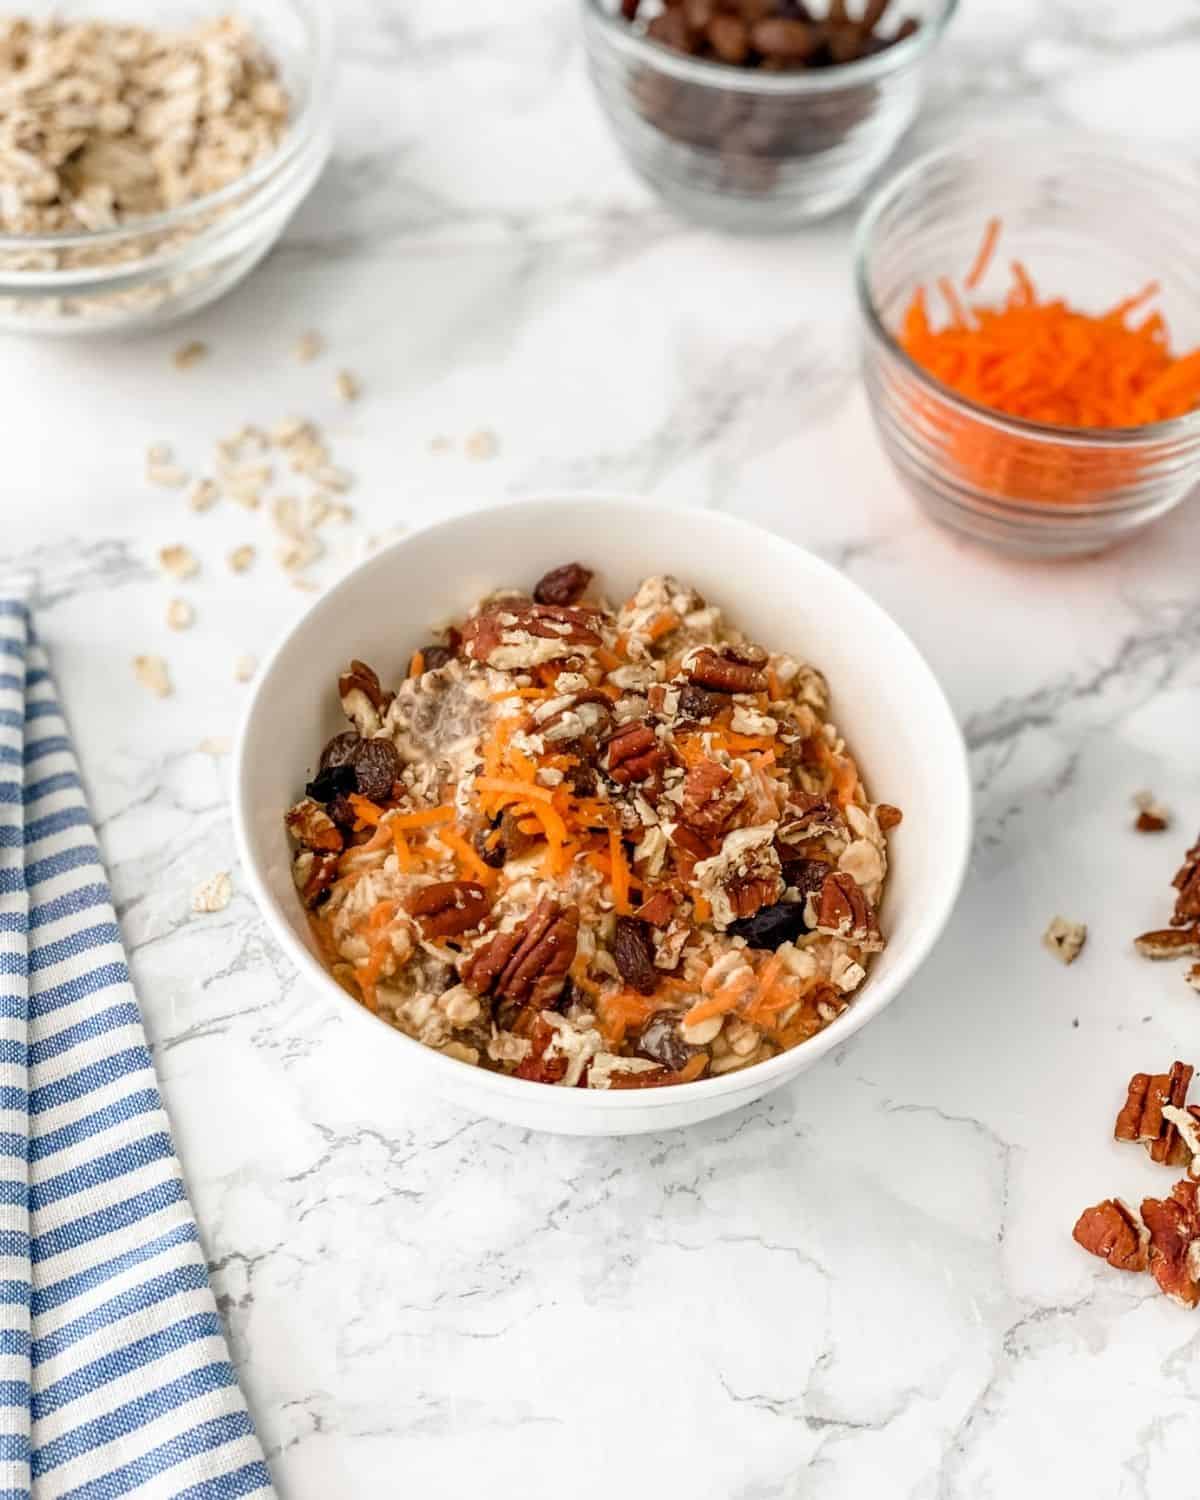 Picture of Carrot Cake Overnight Oats with shredded carrots, pecans and oats around the bowl.